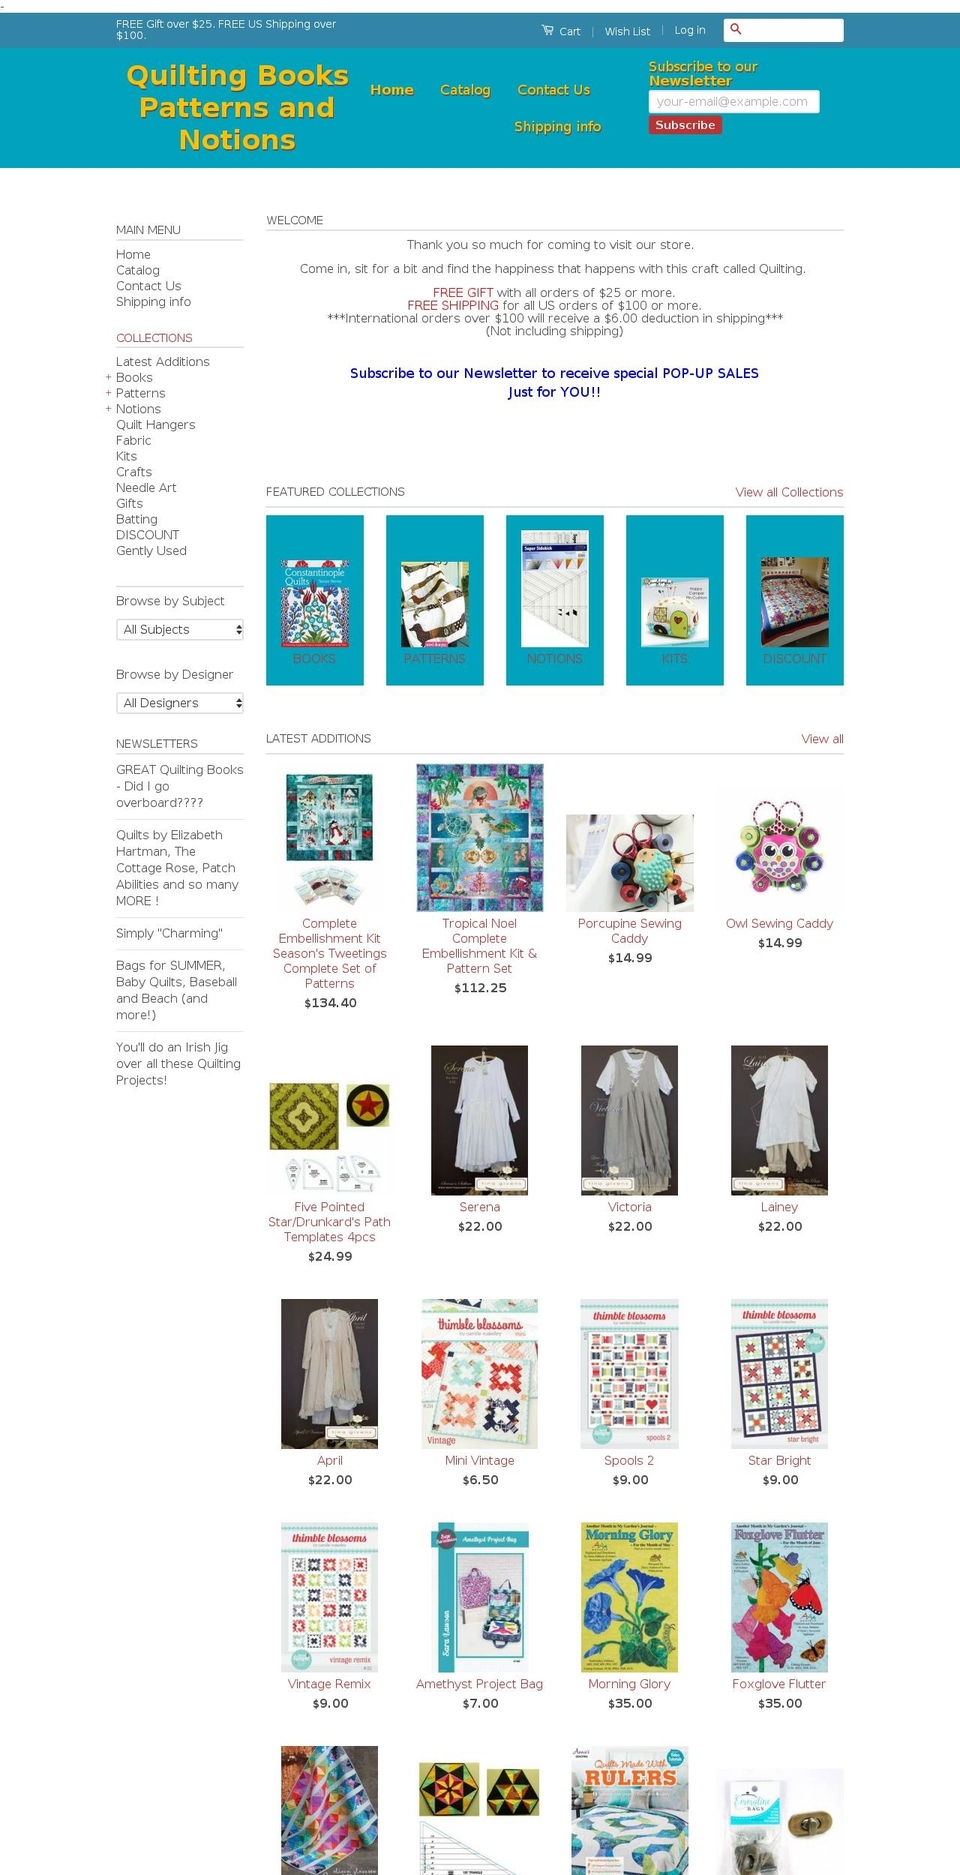 Supply Shopify theme site example quiltingbookspatternsandnotions.com